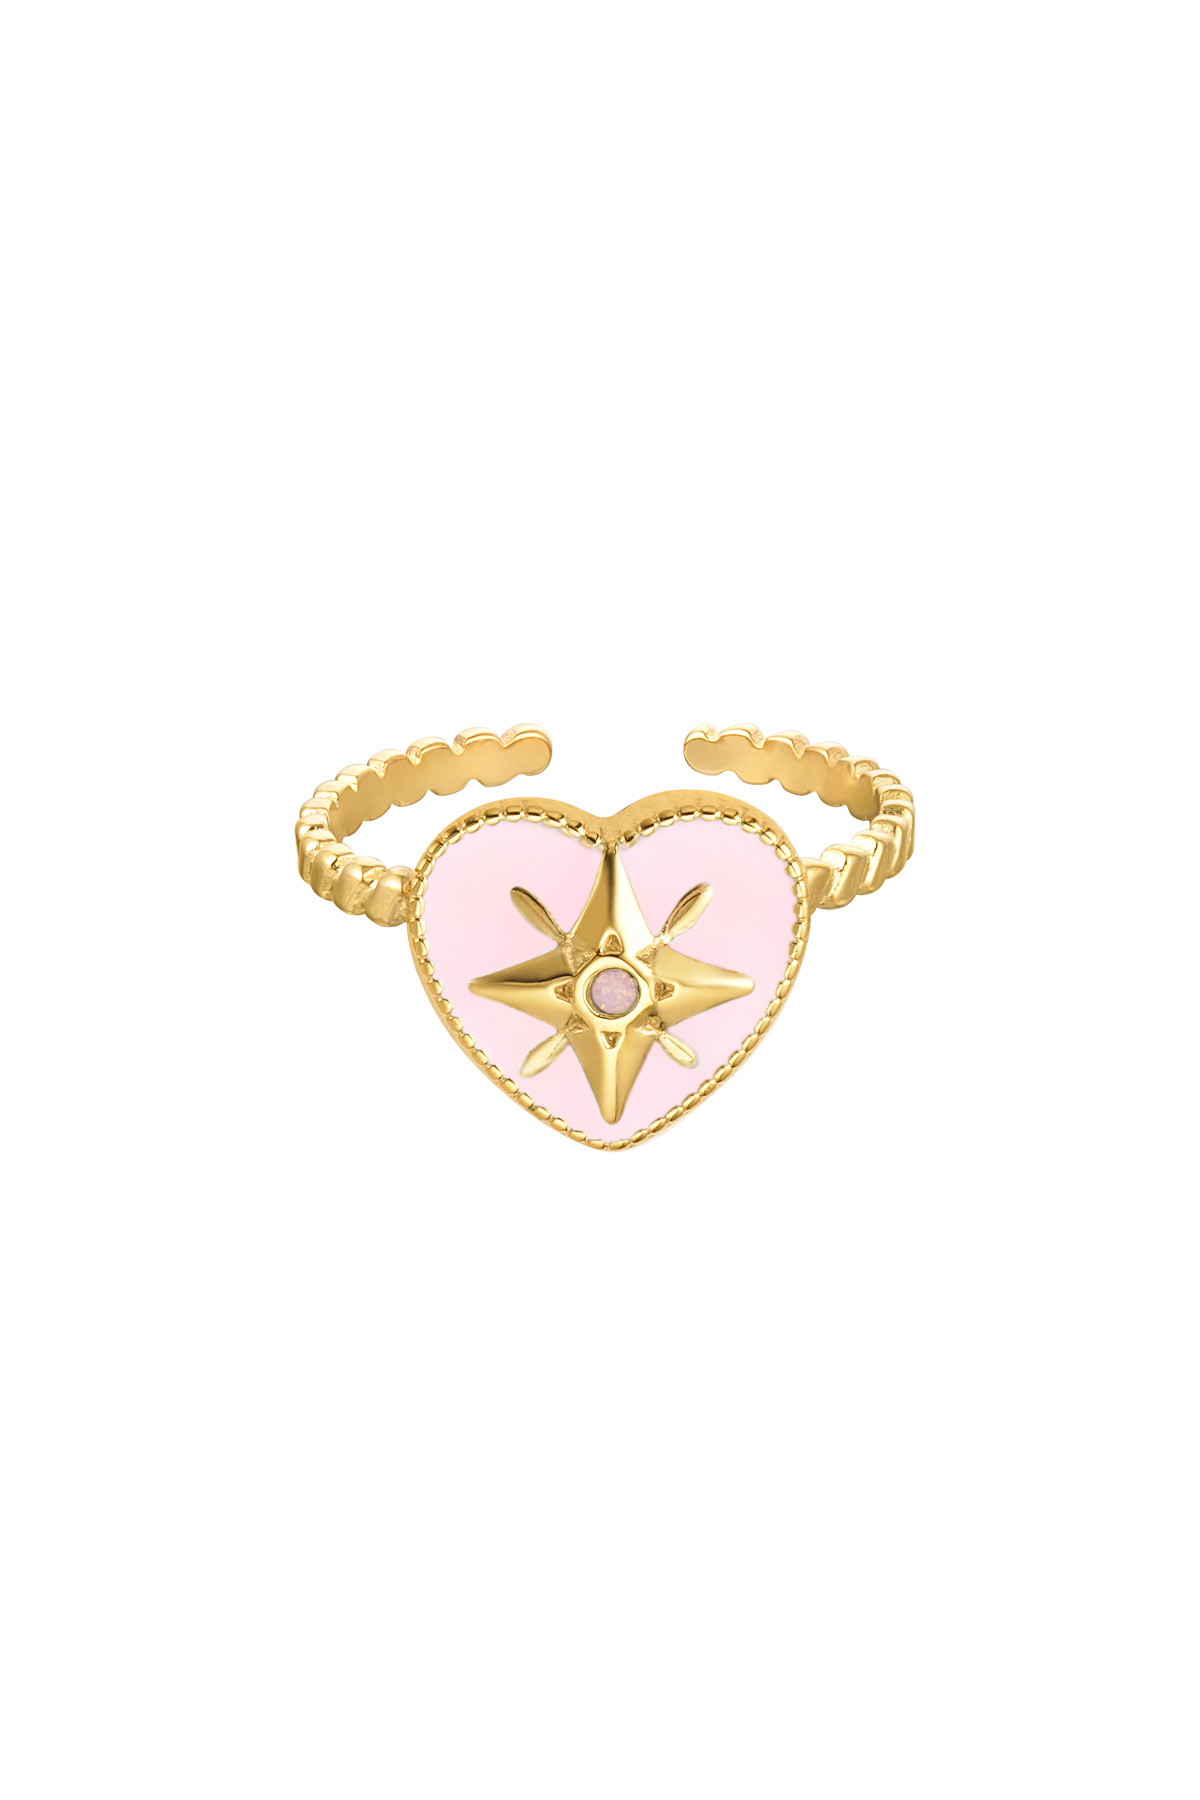 Ring farbiges Herz mit Stern-Emaille Rosa - Gold